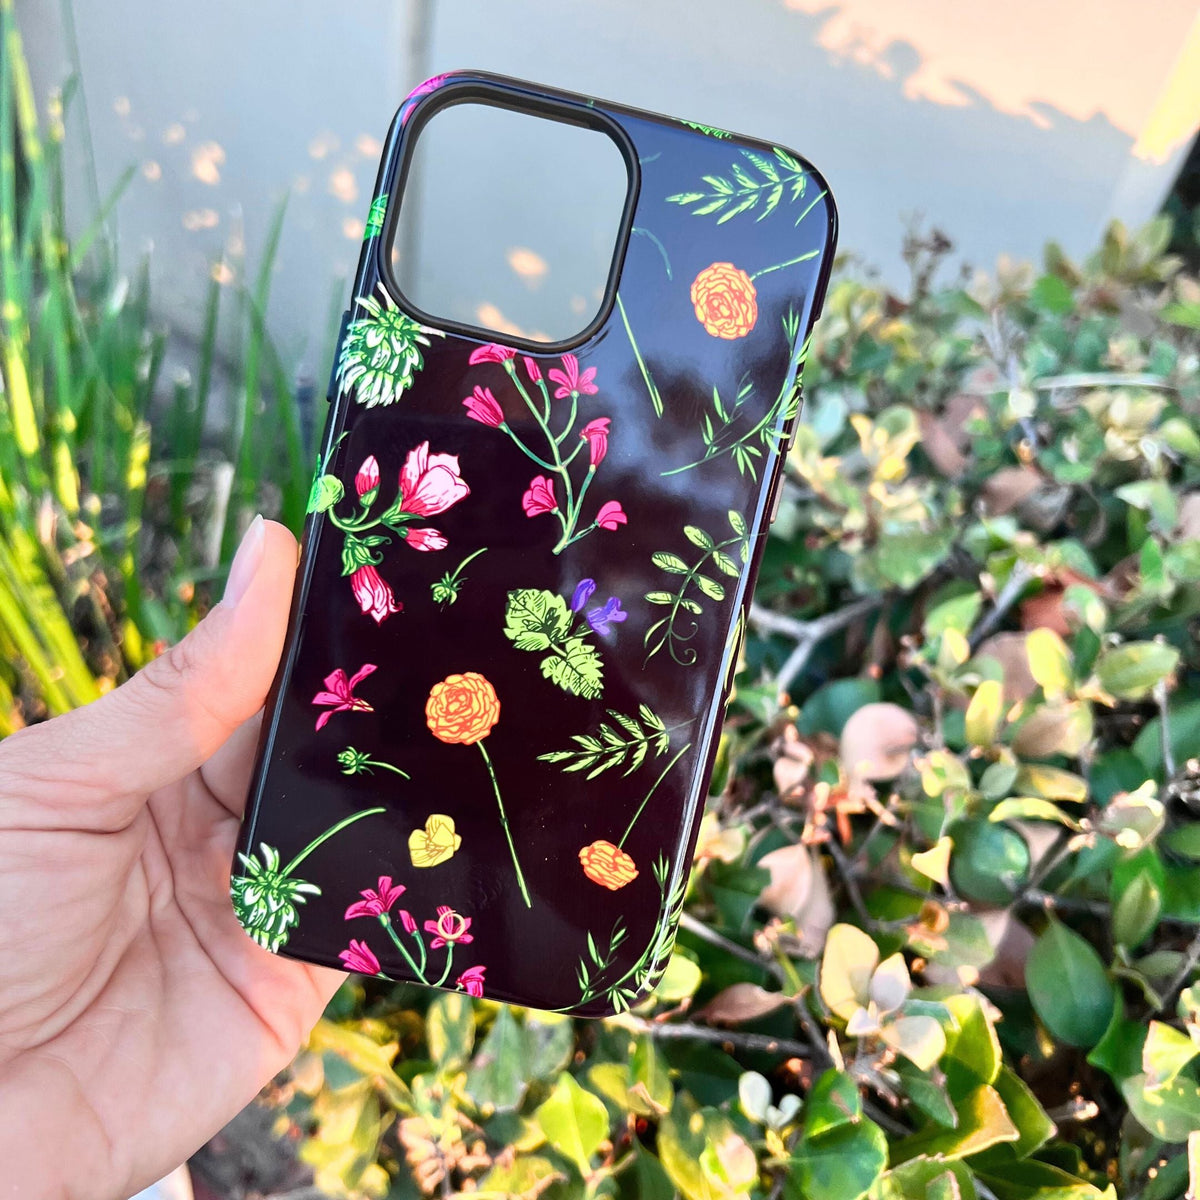 Blossom Field Flowers iPhone Case - iPhone 12 Pro Max